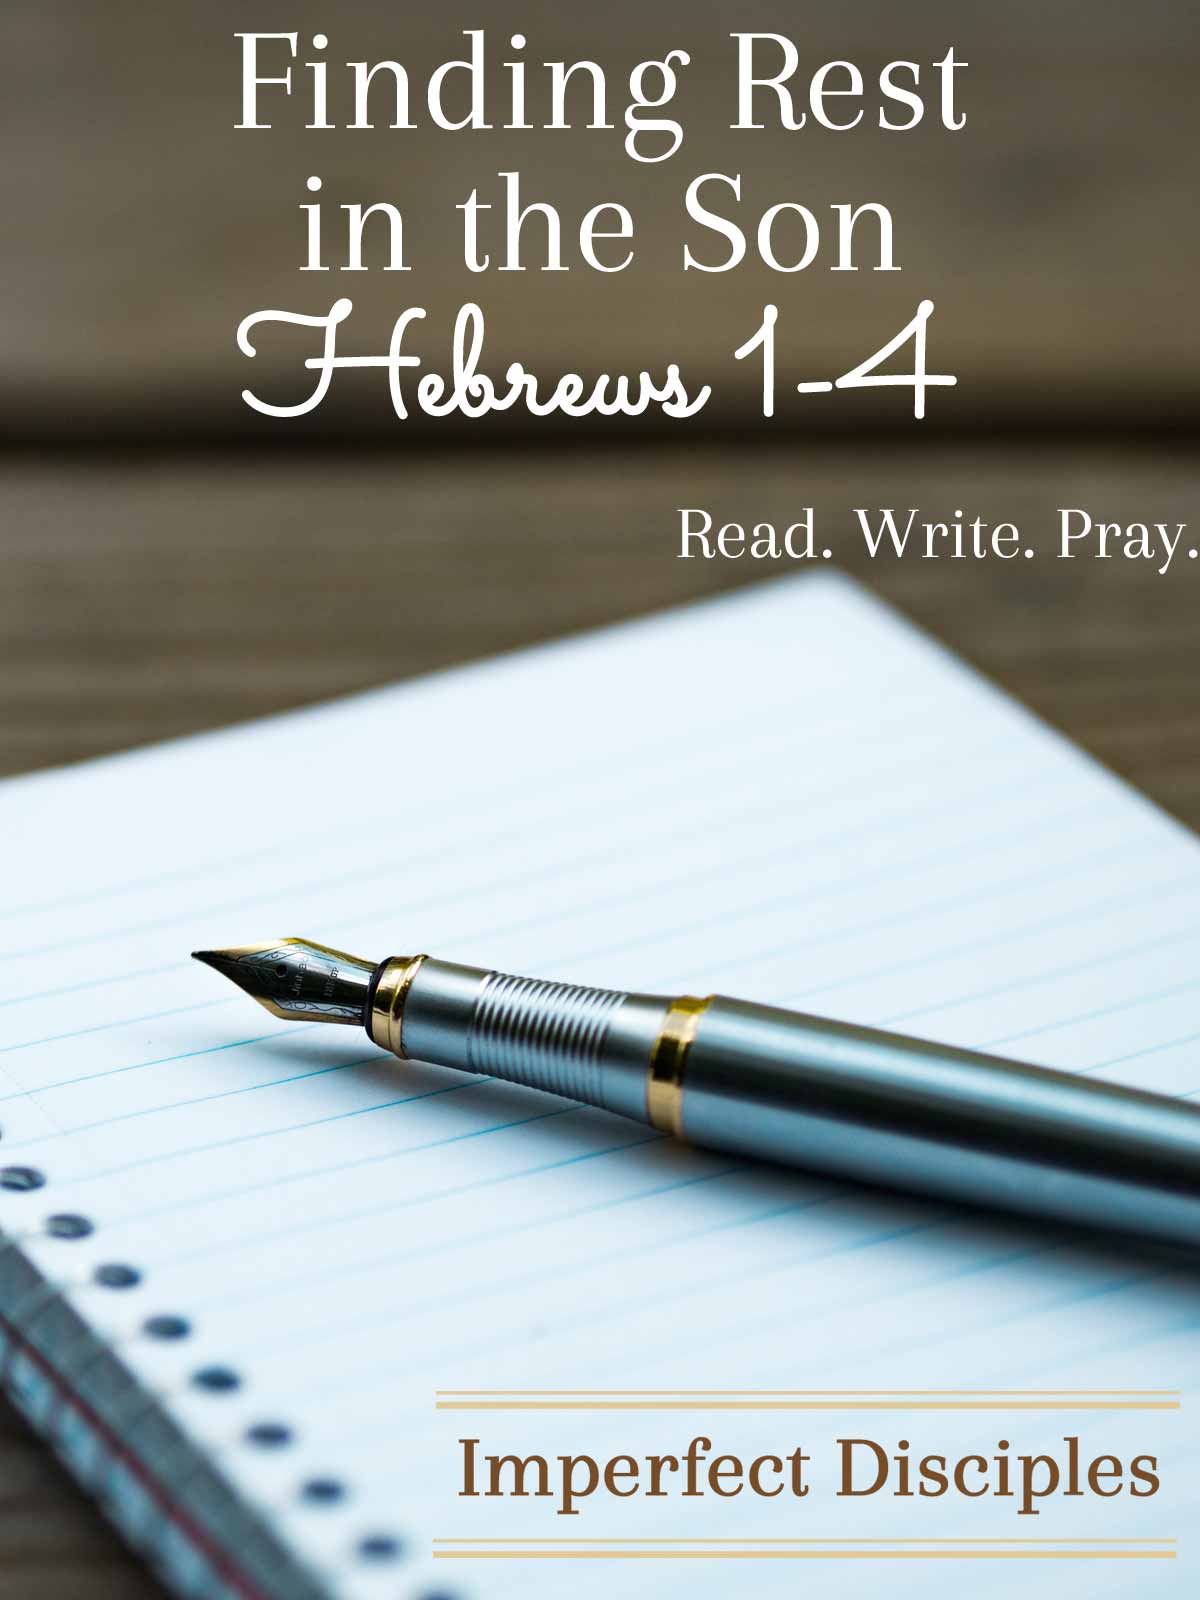 Finding Rest in the Son: Hebrews 1-4 - Read. Write. Pray.